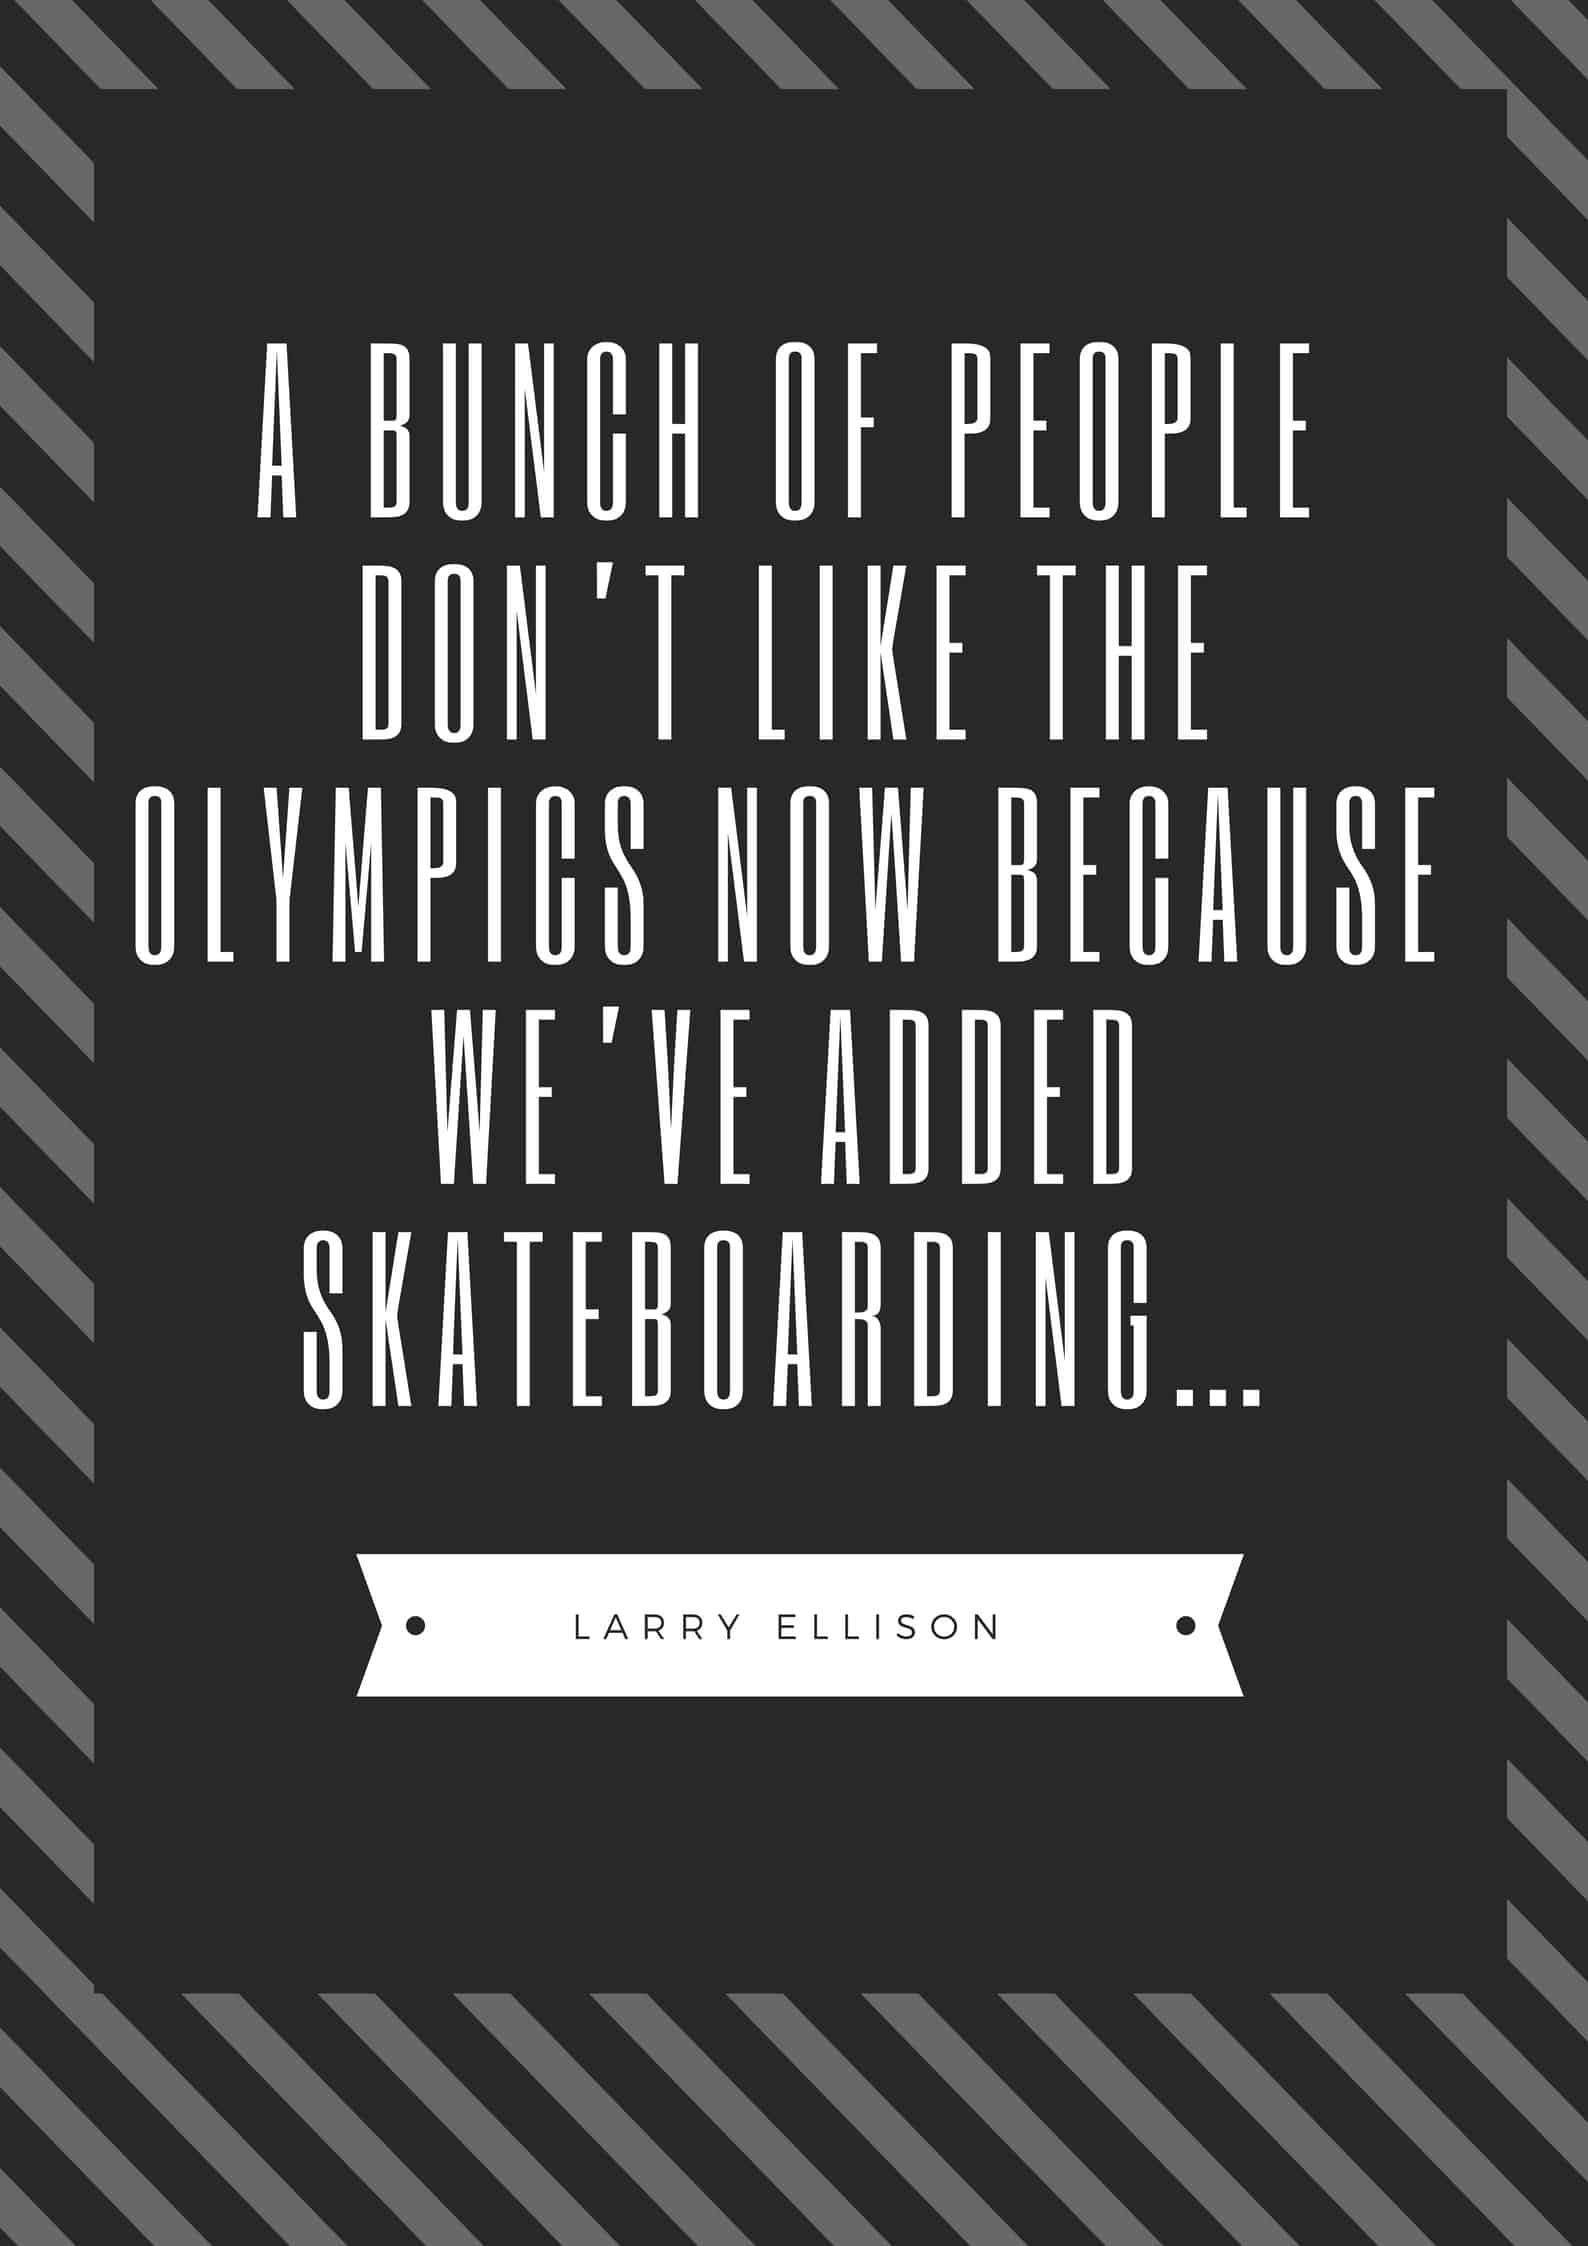 A BUNCH OF PEOPLE DON’T LIKE THE OLYMPICS NOW BECAUSE WE’VE ADDED SKATEBOARDING…